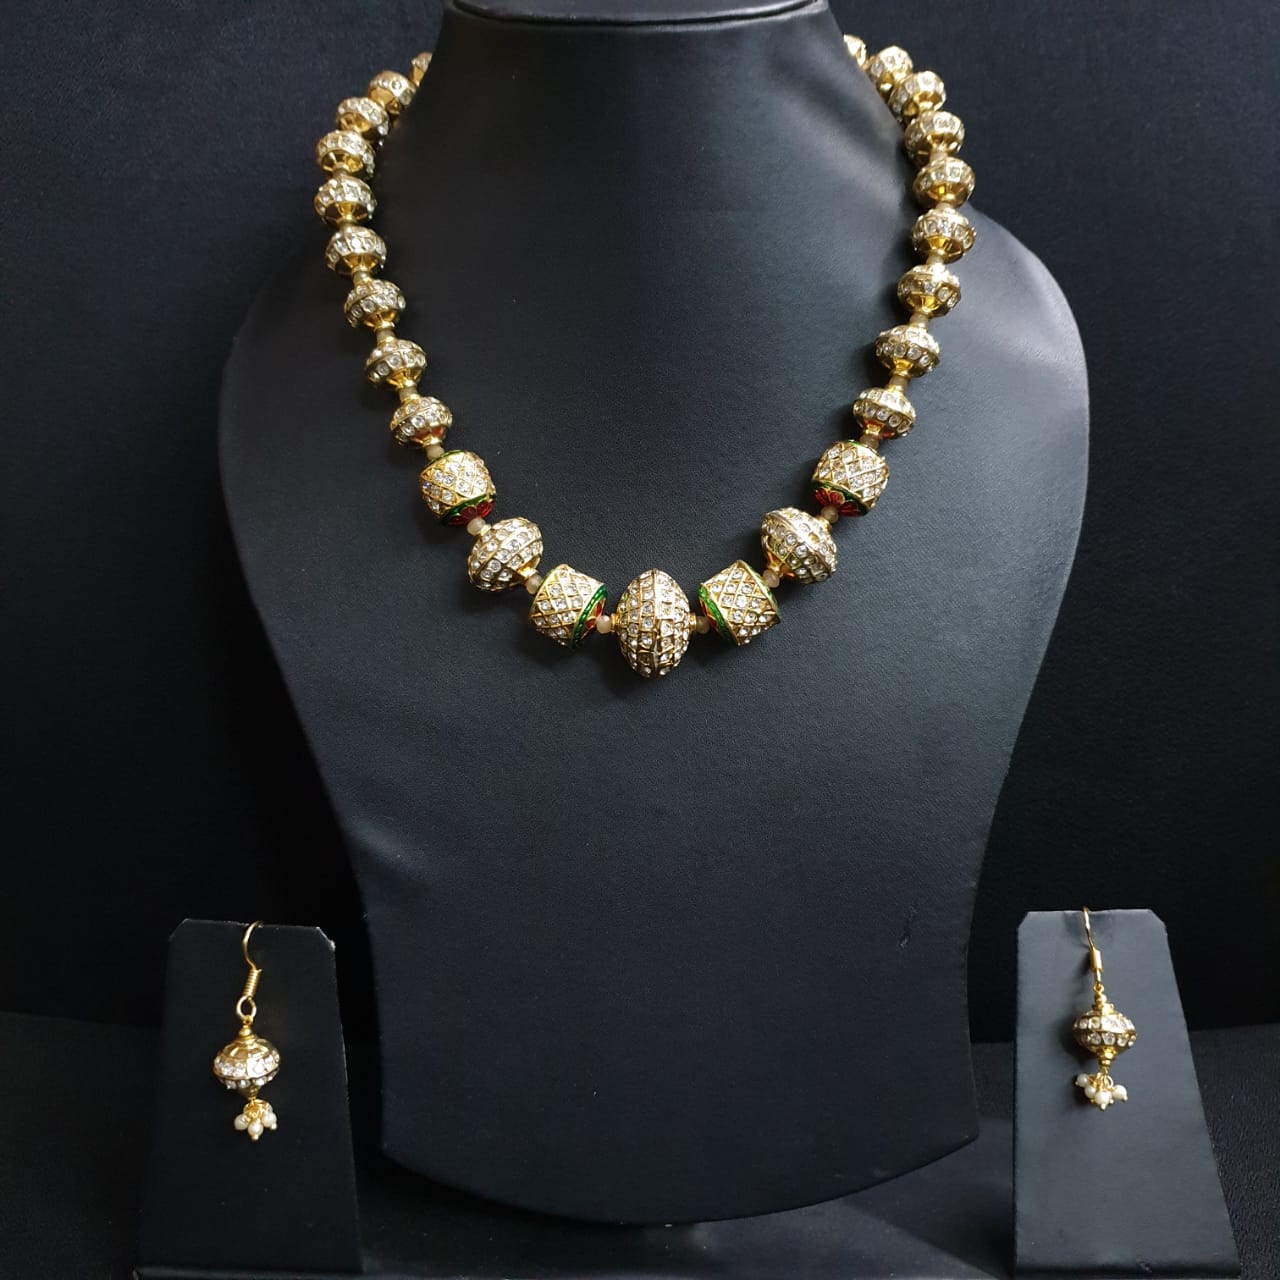 White Stone Jadau Necklace With Earrings